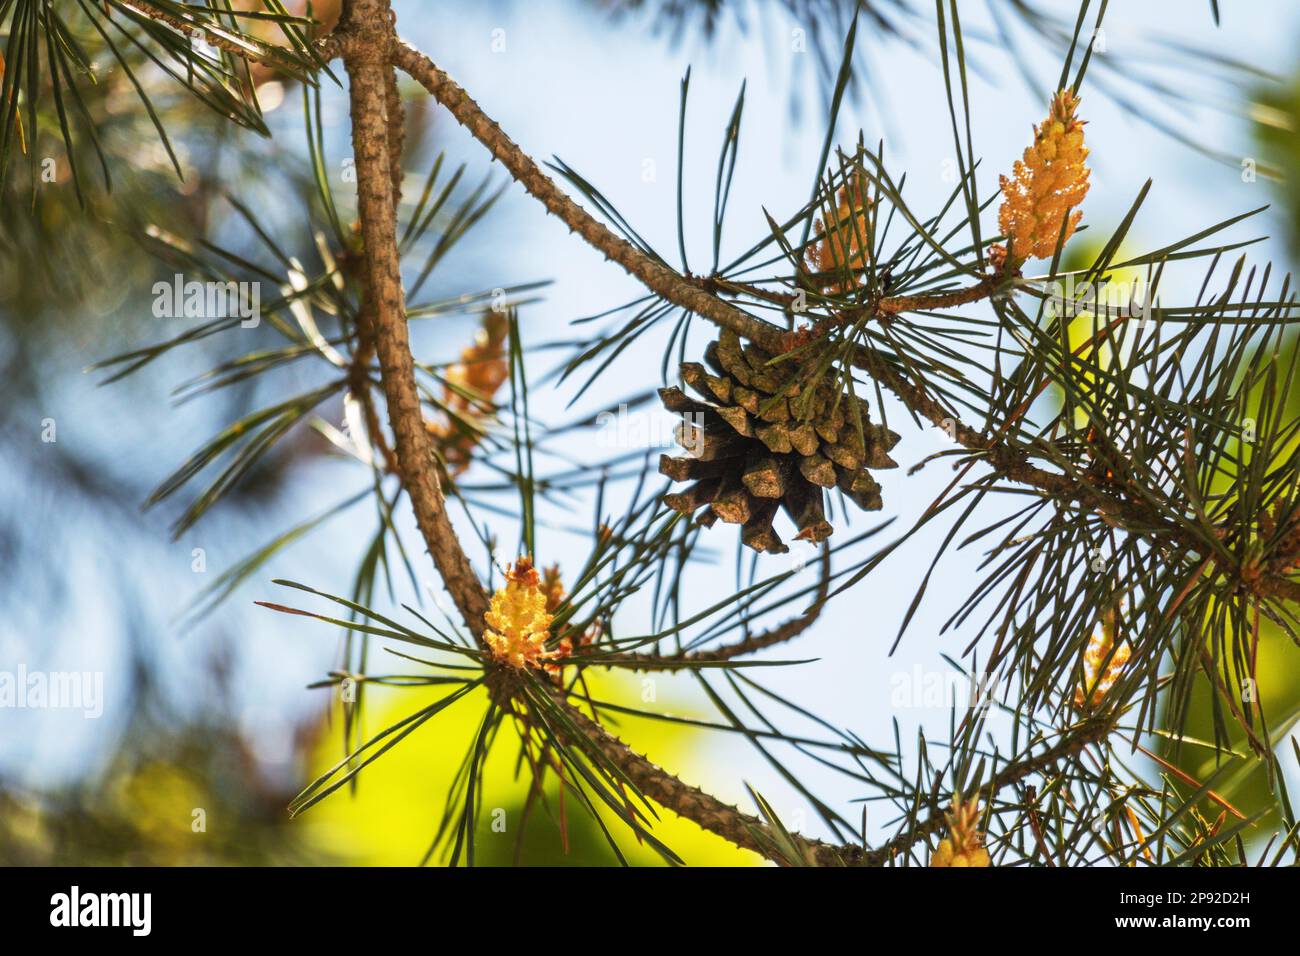 Pine tree branch with small cone and small flowers in it and blue sky background Stock Photo